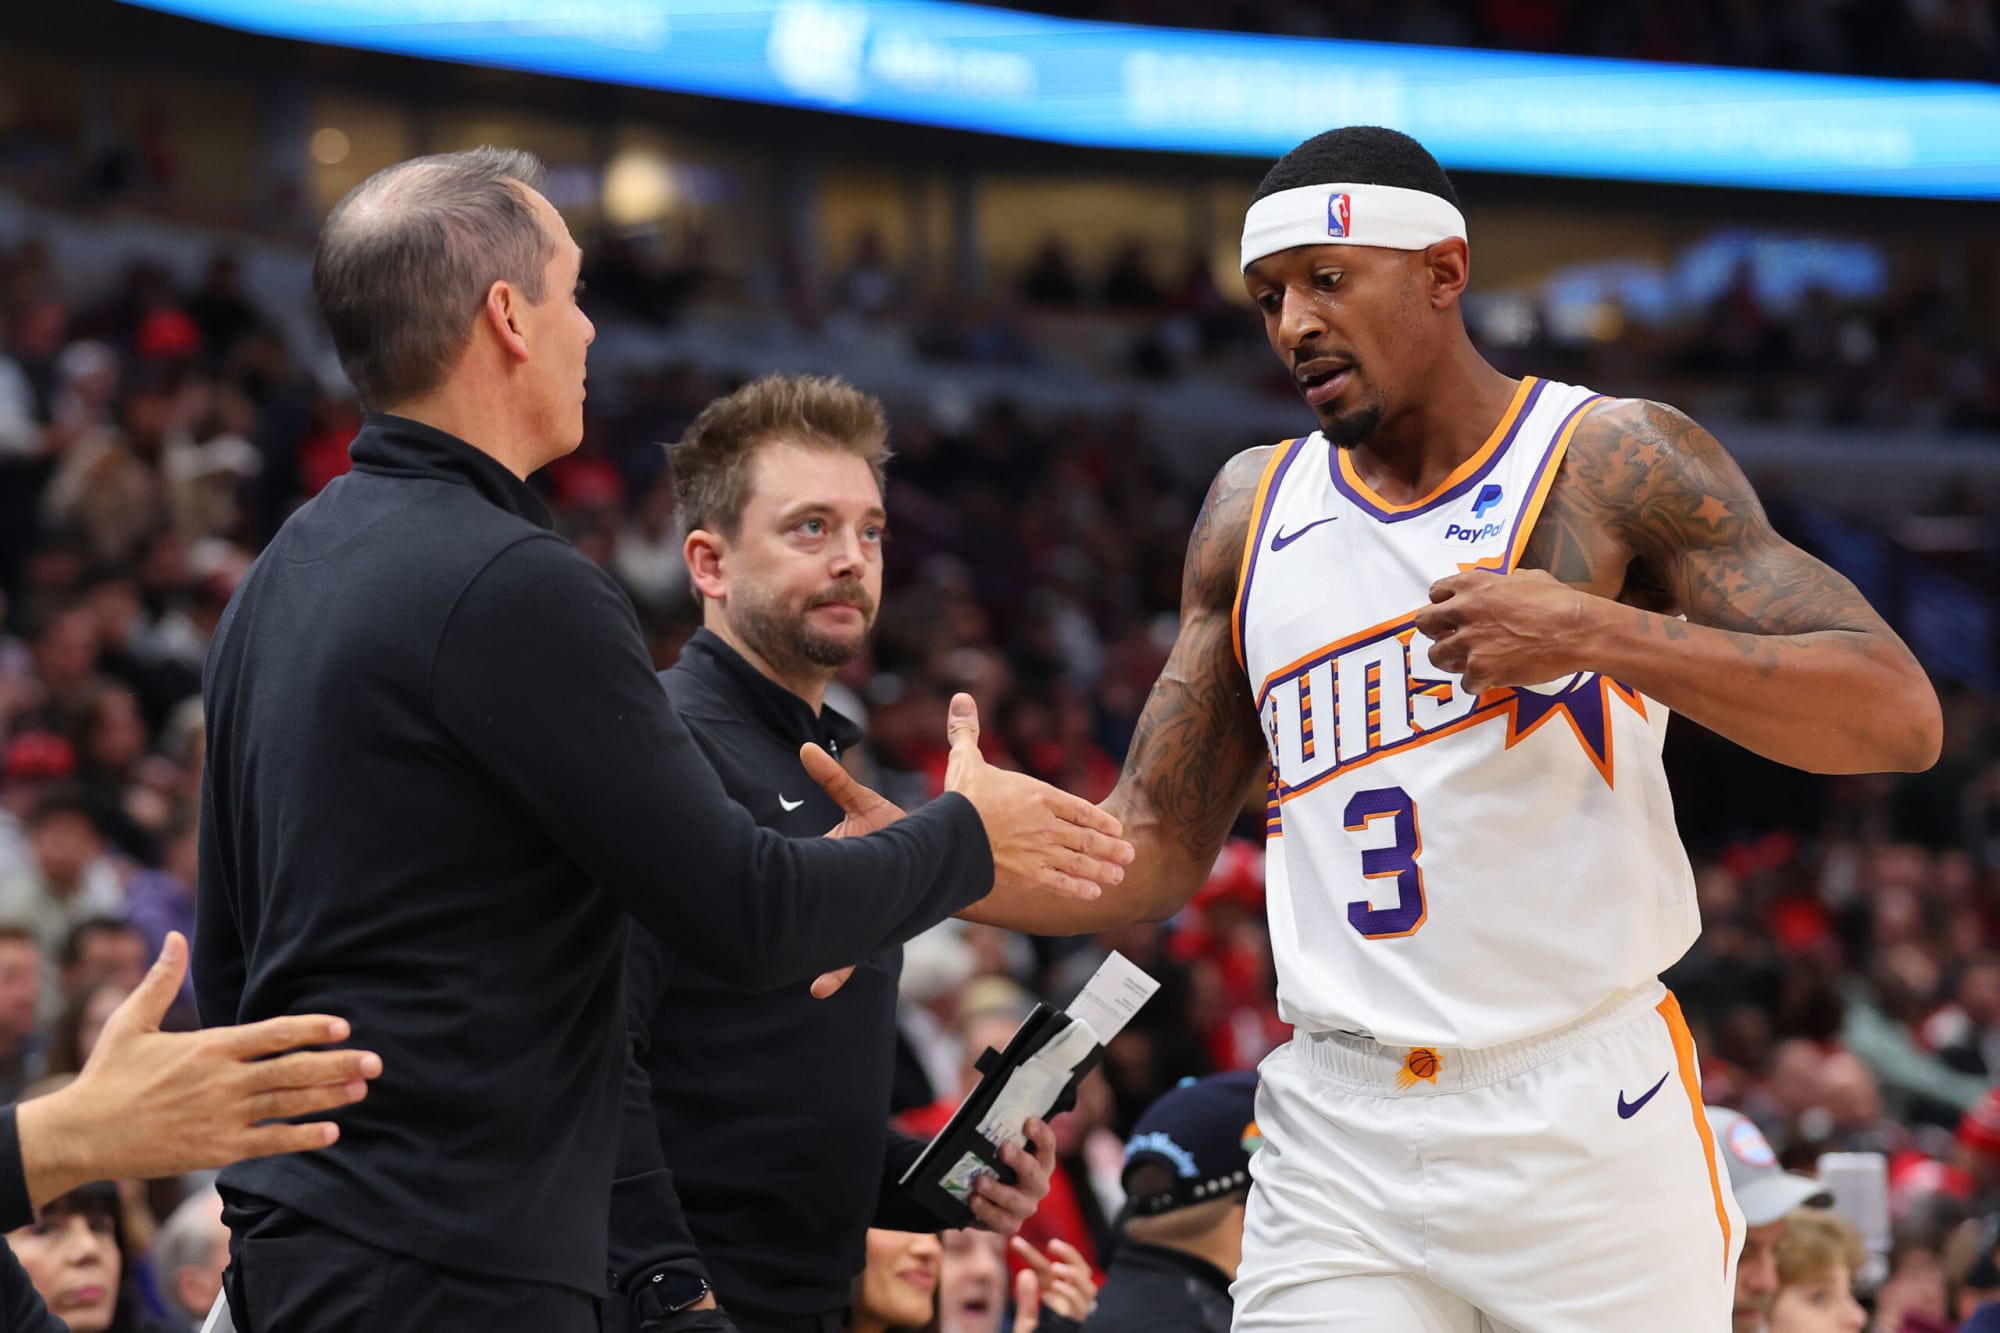 Bradley Beal shows frustration at current Suns situation